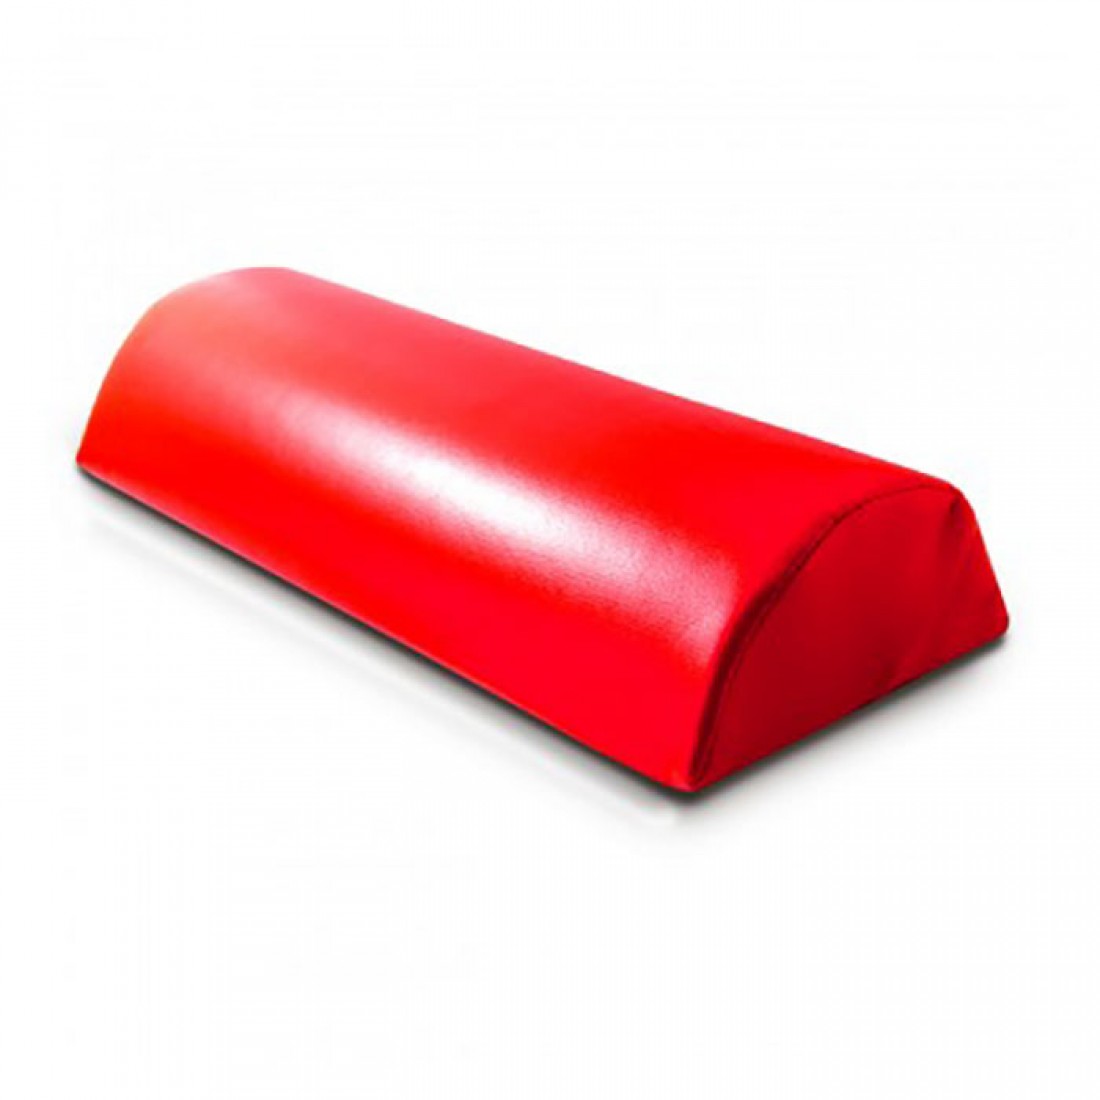 Professional manicure pad red pu leather - 3280008 MANICURE PILLOWS & ARM RESTS 